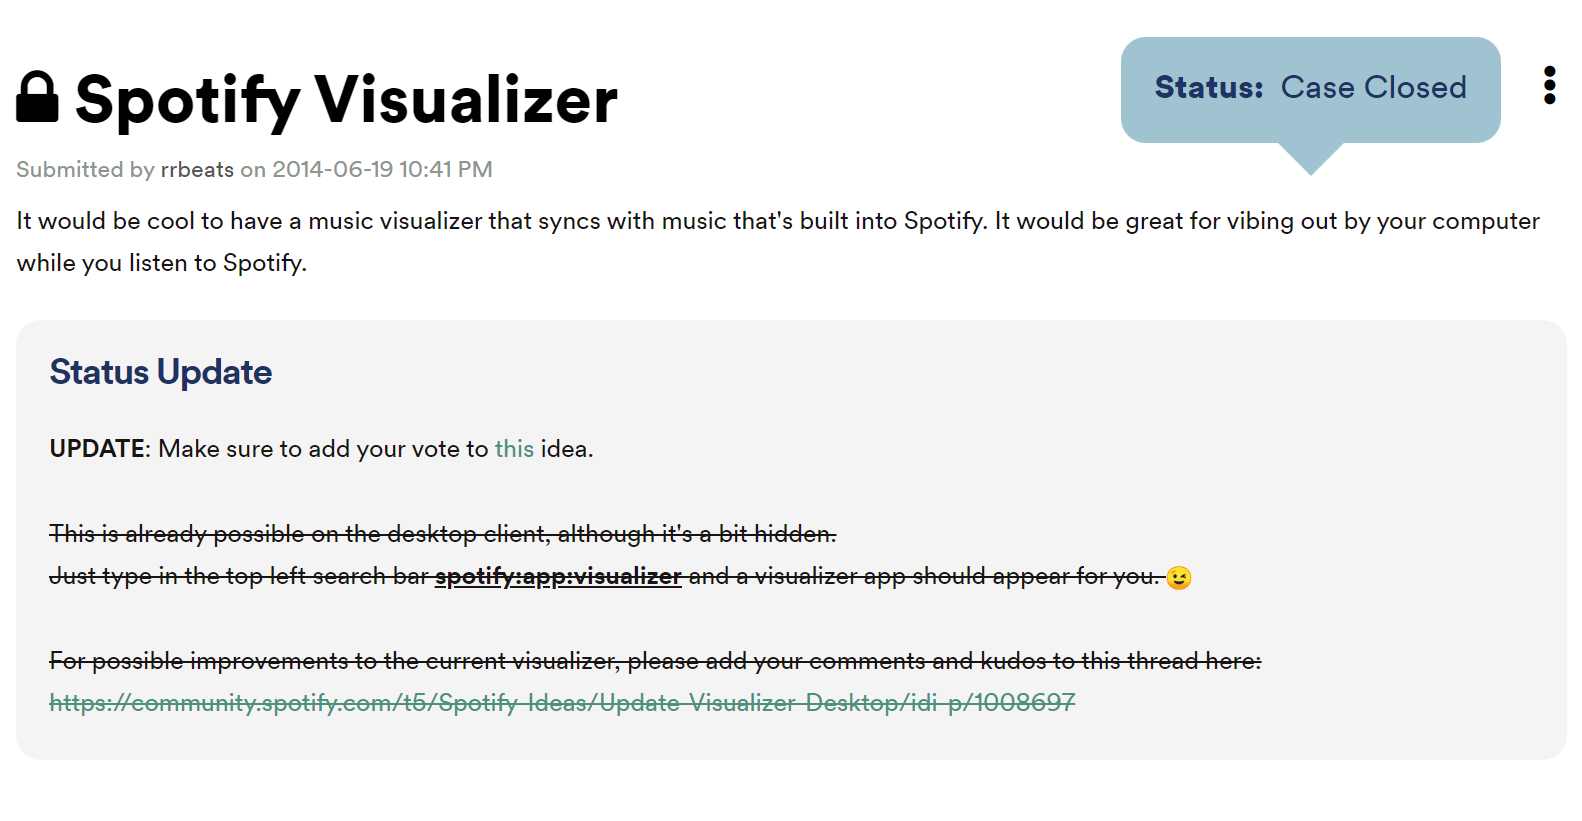 Spotify Visualizer is gesloten